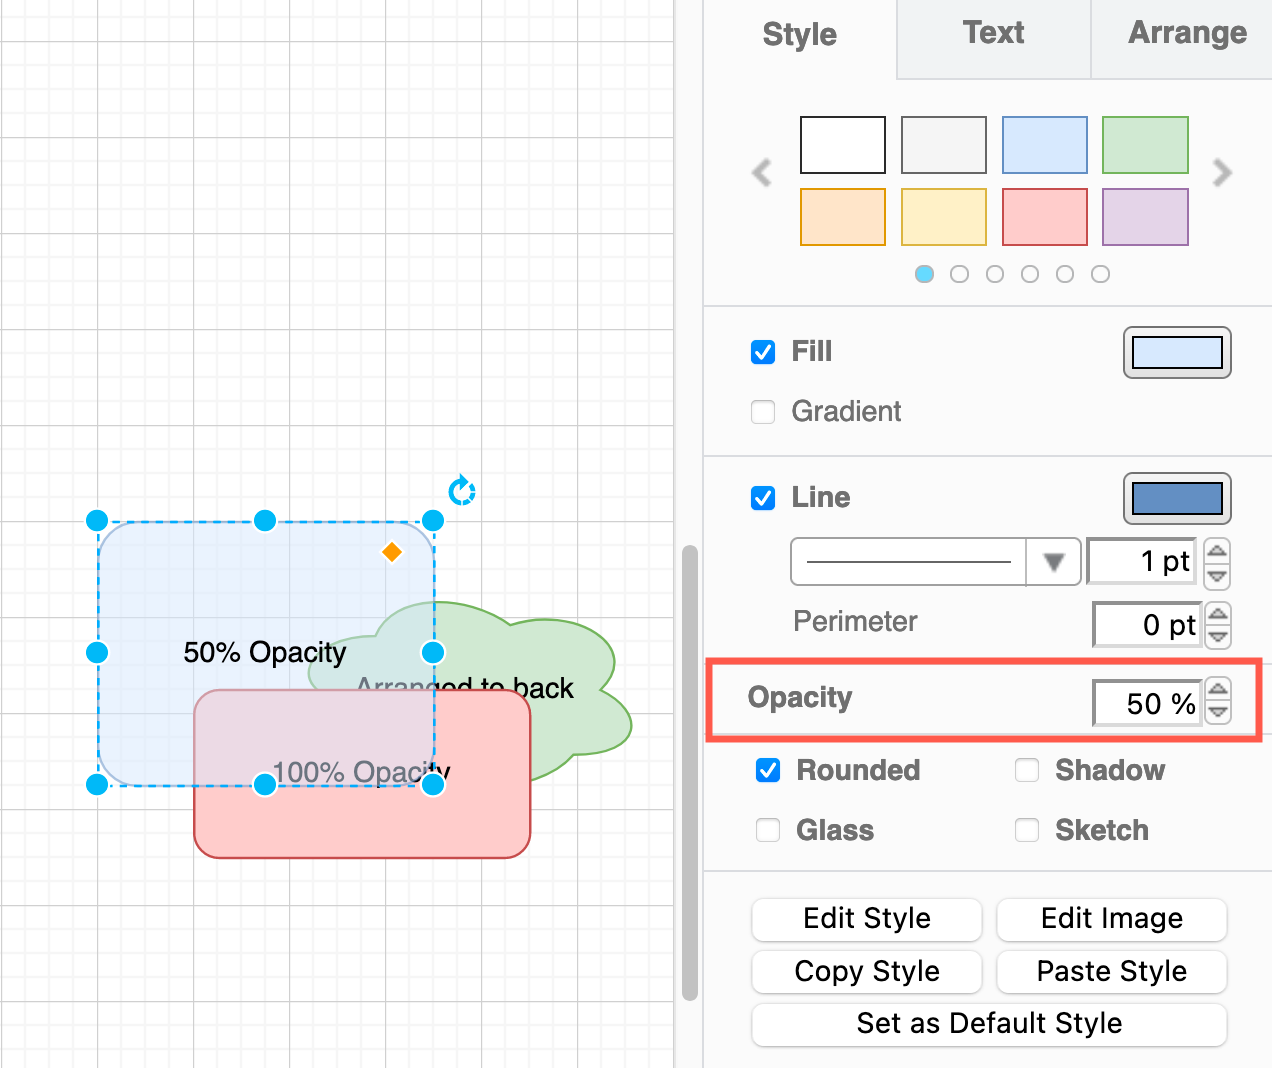 Set a new value for Opacity to make a shape more transparent and let shapes underneath show through